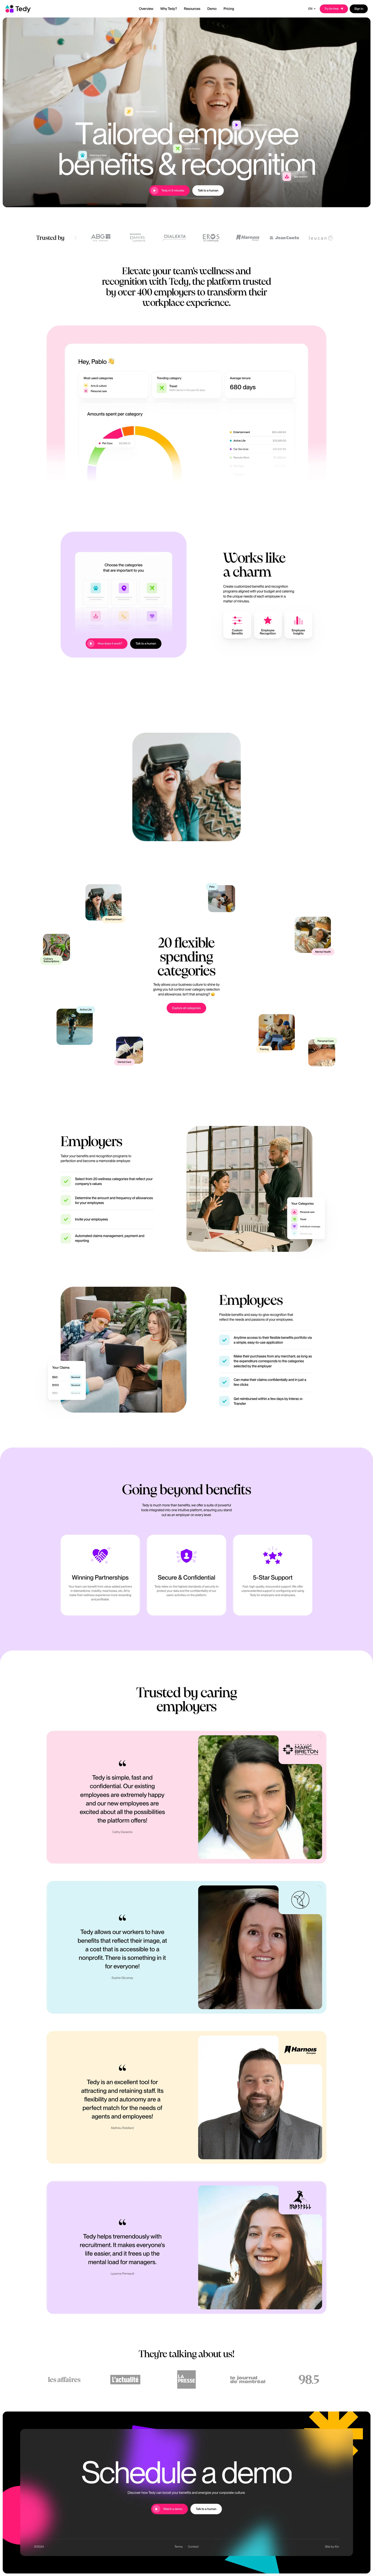 Tedy Landing Page Example: Transform your workplace with Tedy – the ultimate platform for tailored employee benefits and recognition. Offering customizable programs in 20 wellness categories, Tedy empowers employers to cater to individual employee needs while streamlining claims and refunds.